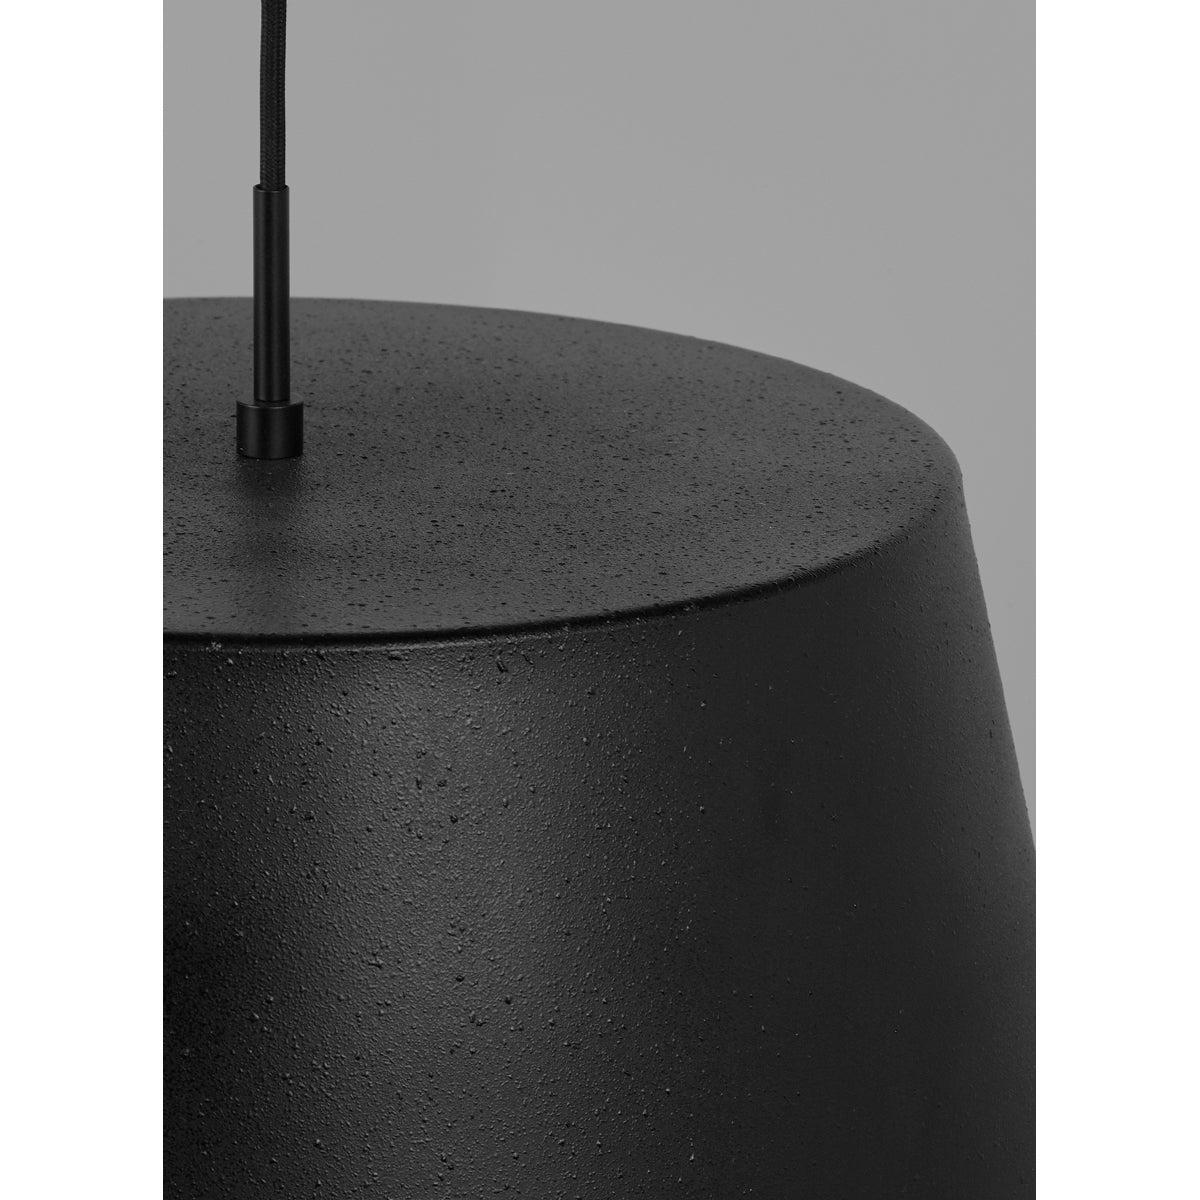 Detail view of Black Henley Pendant from Tech Lighting